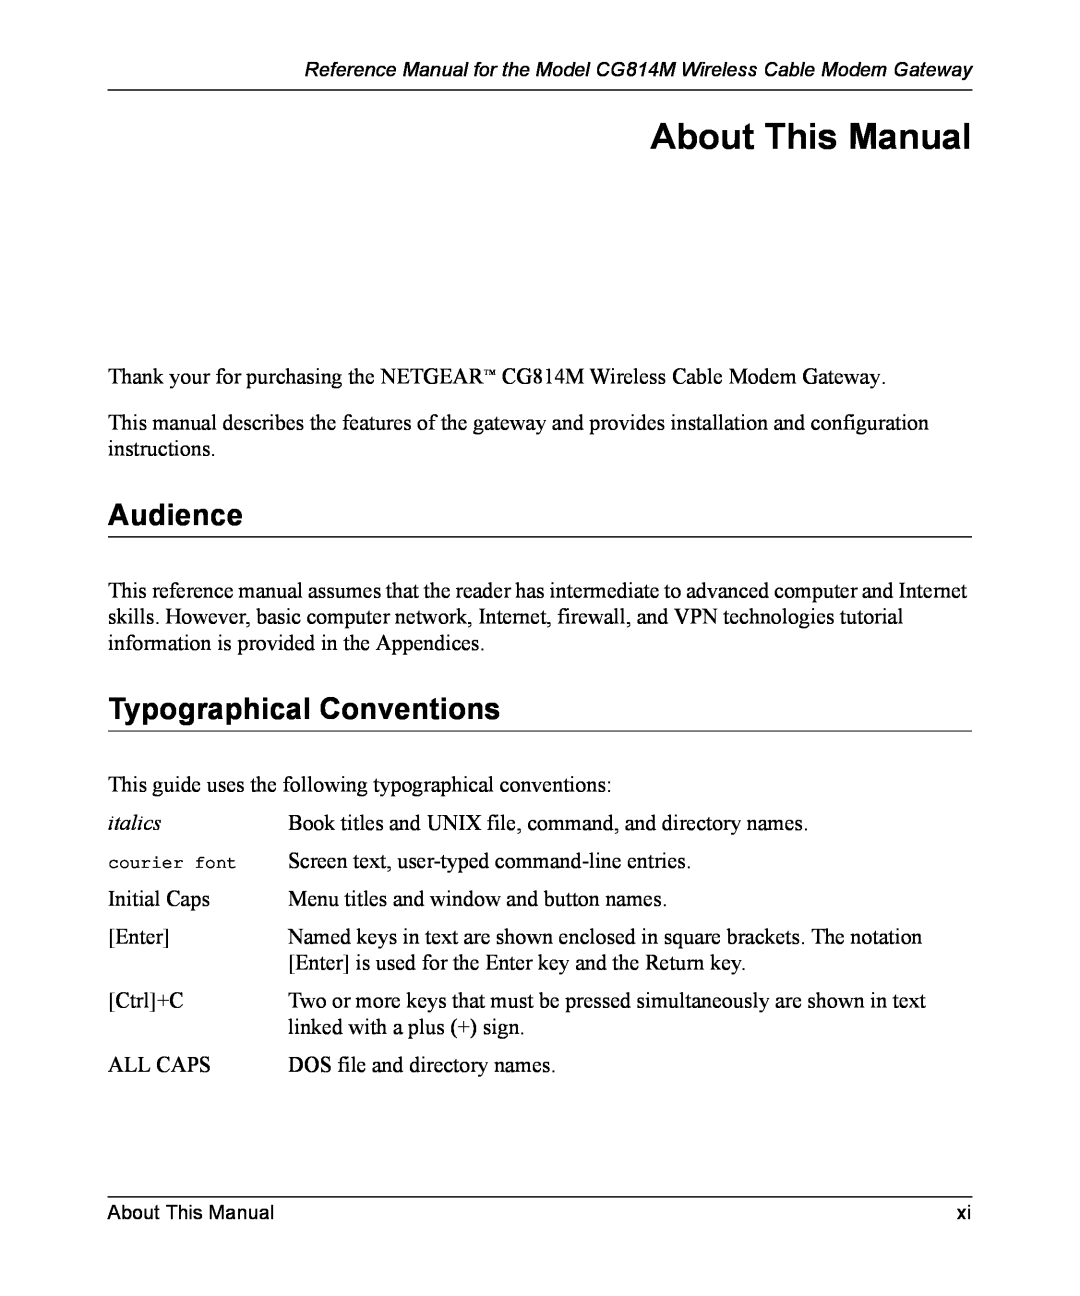 NETGEAR CG814M manual About This Manual, Audience, Typographical Conventions 